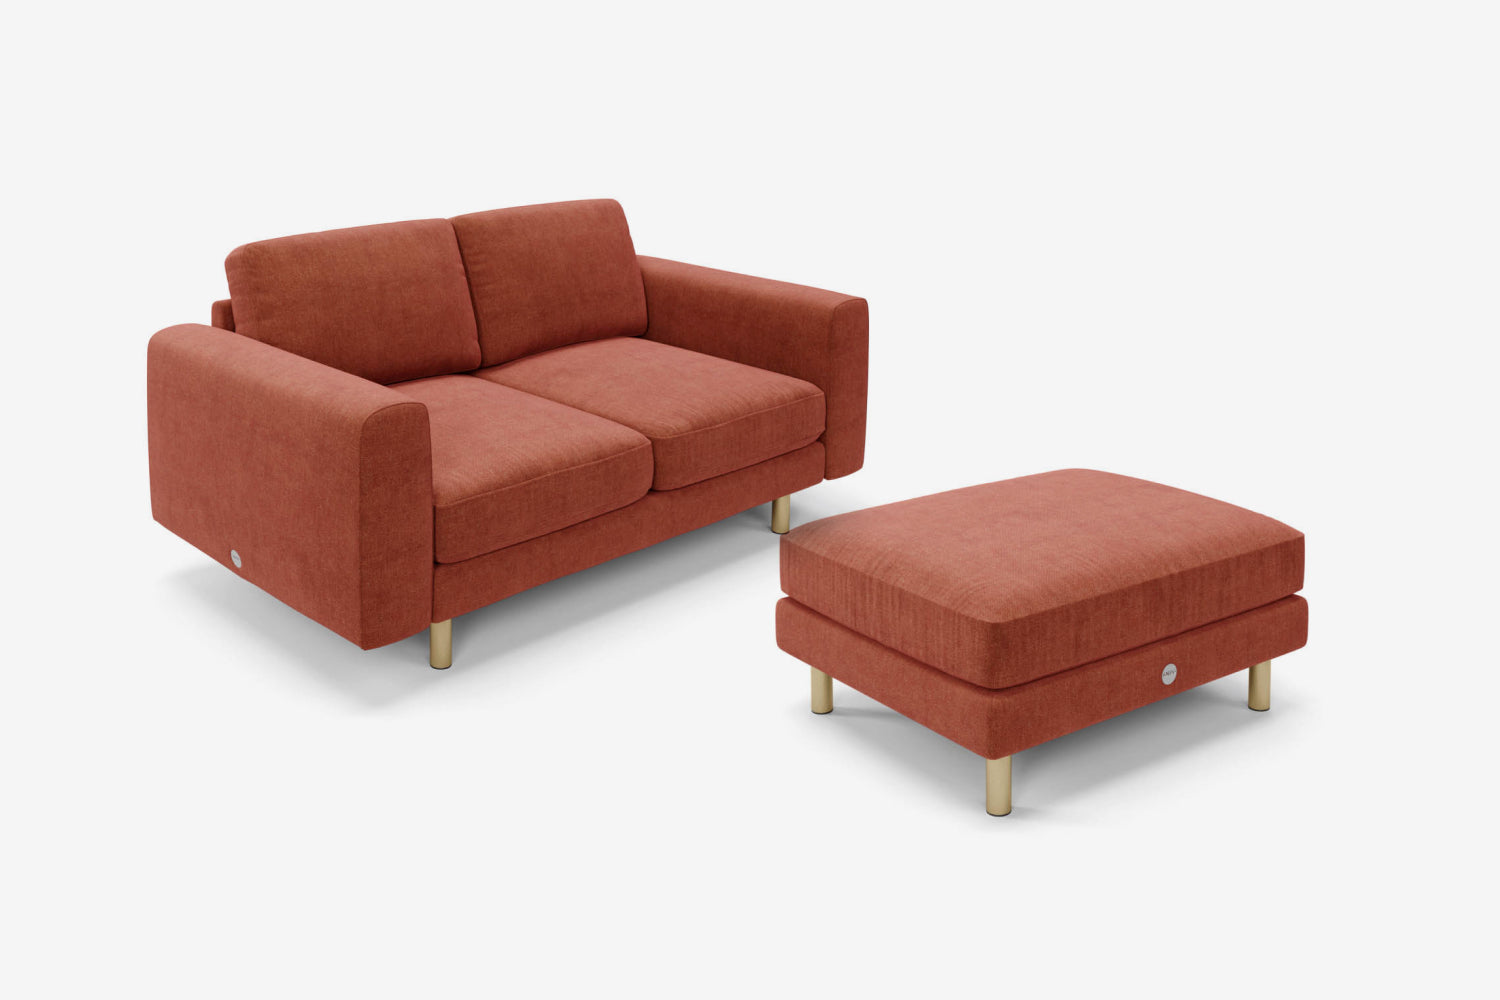 The Big Chill - 2 Seater Sofa and Footstool Set - Spice